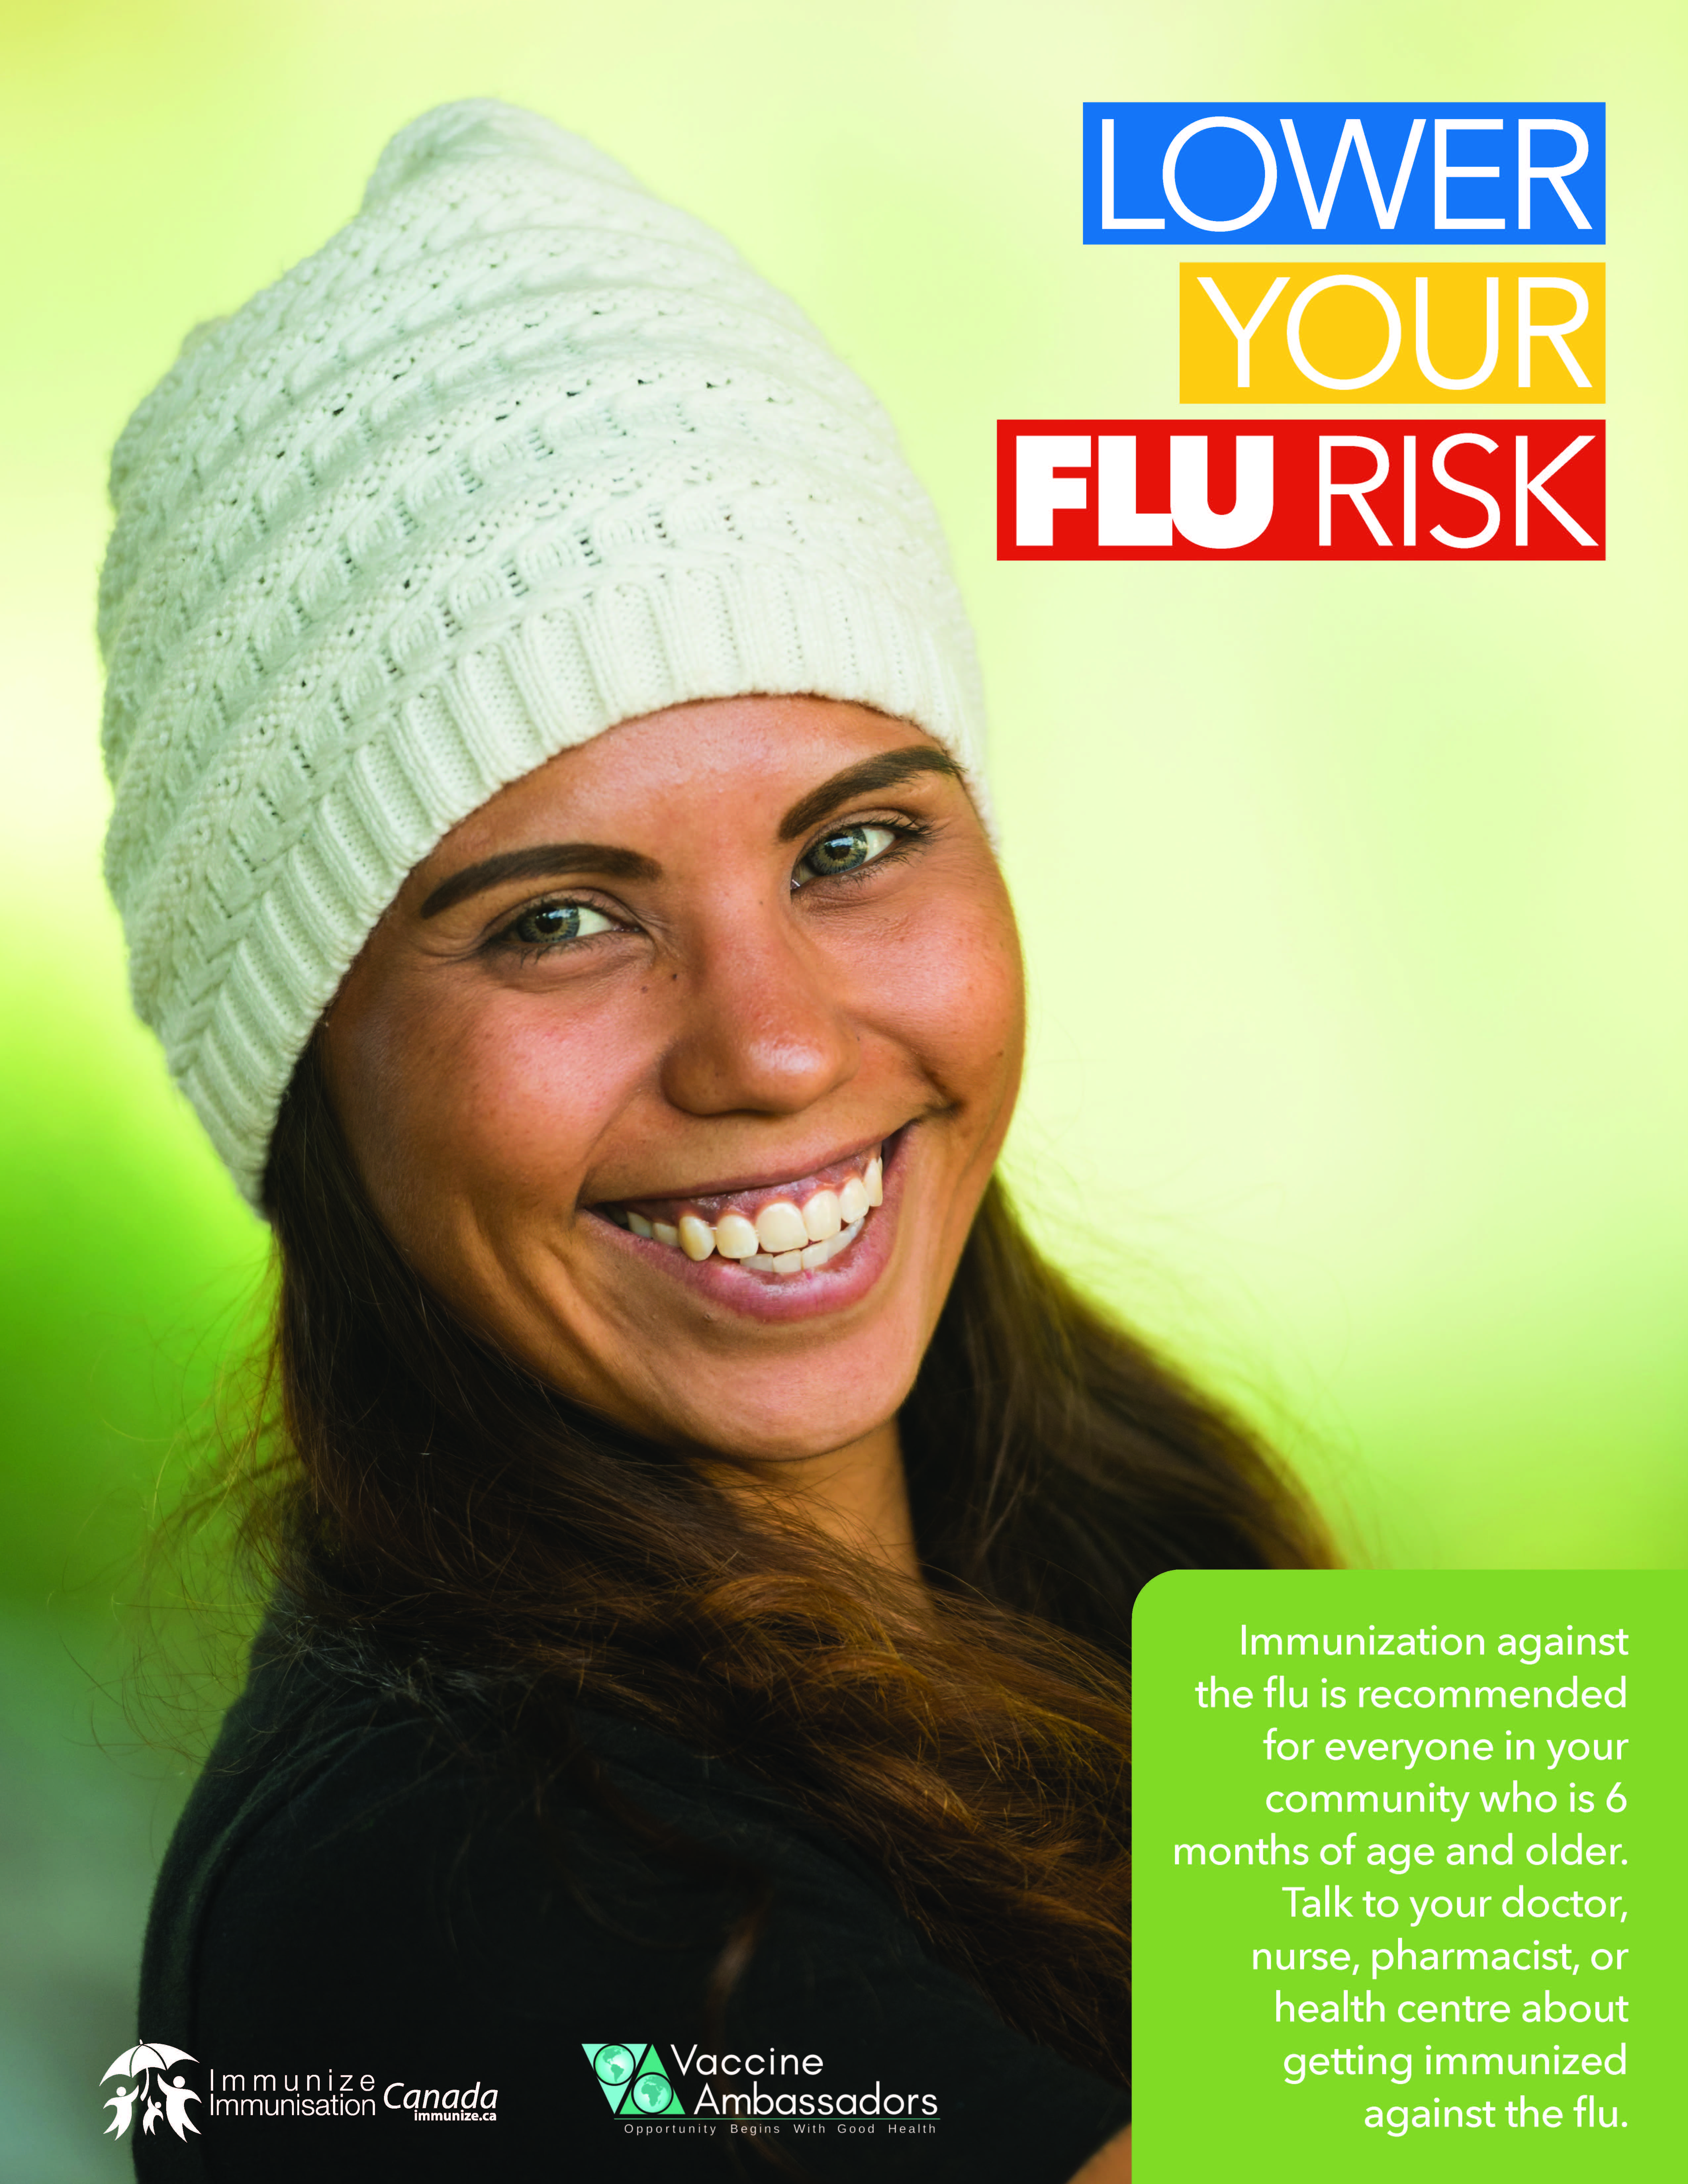 Lower your flu risk - Indigenous people